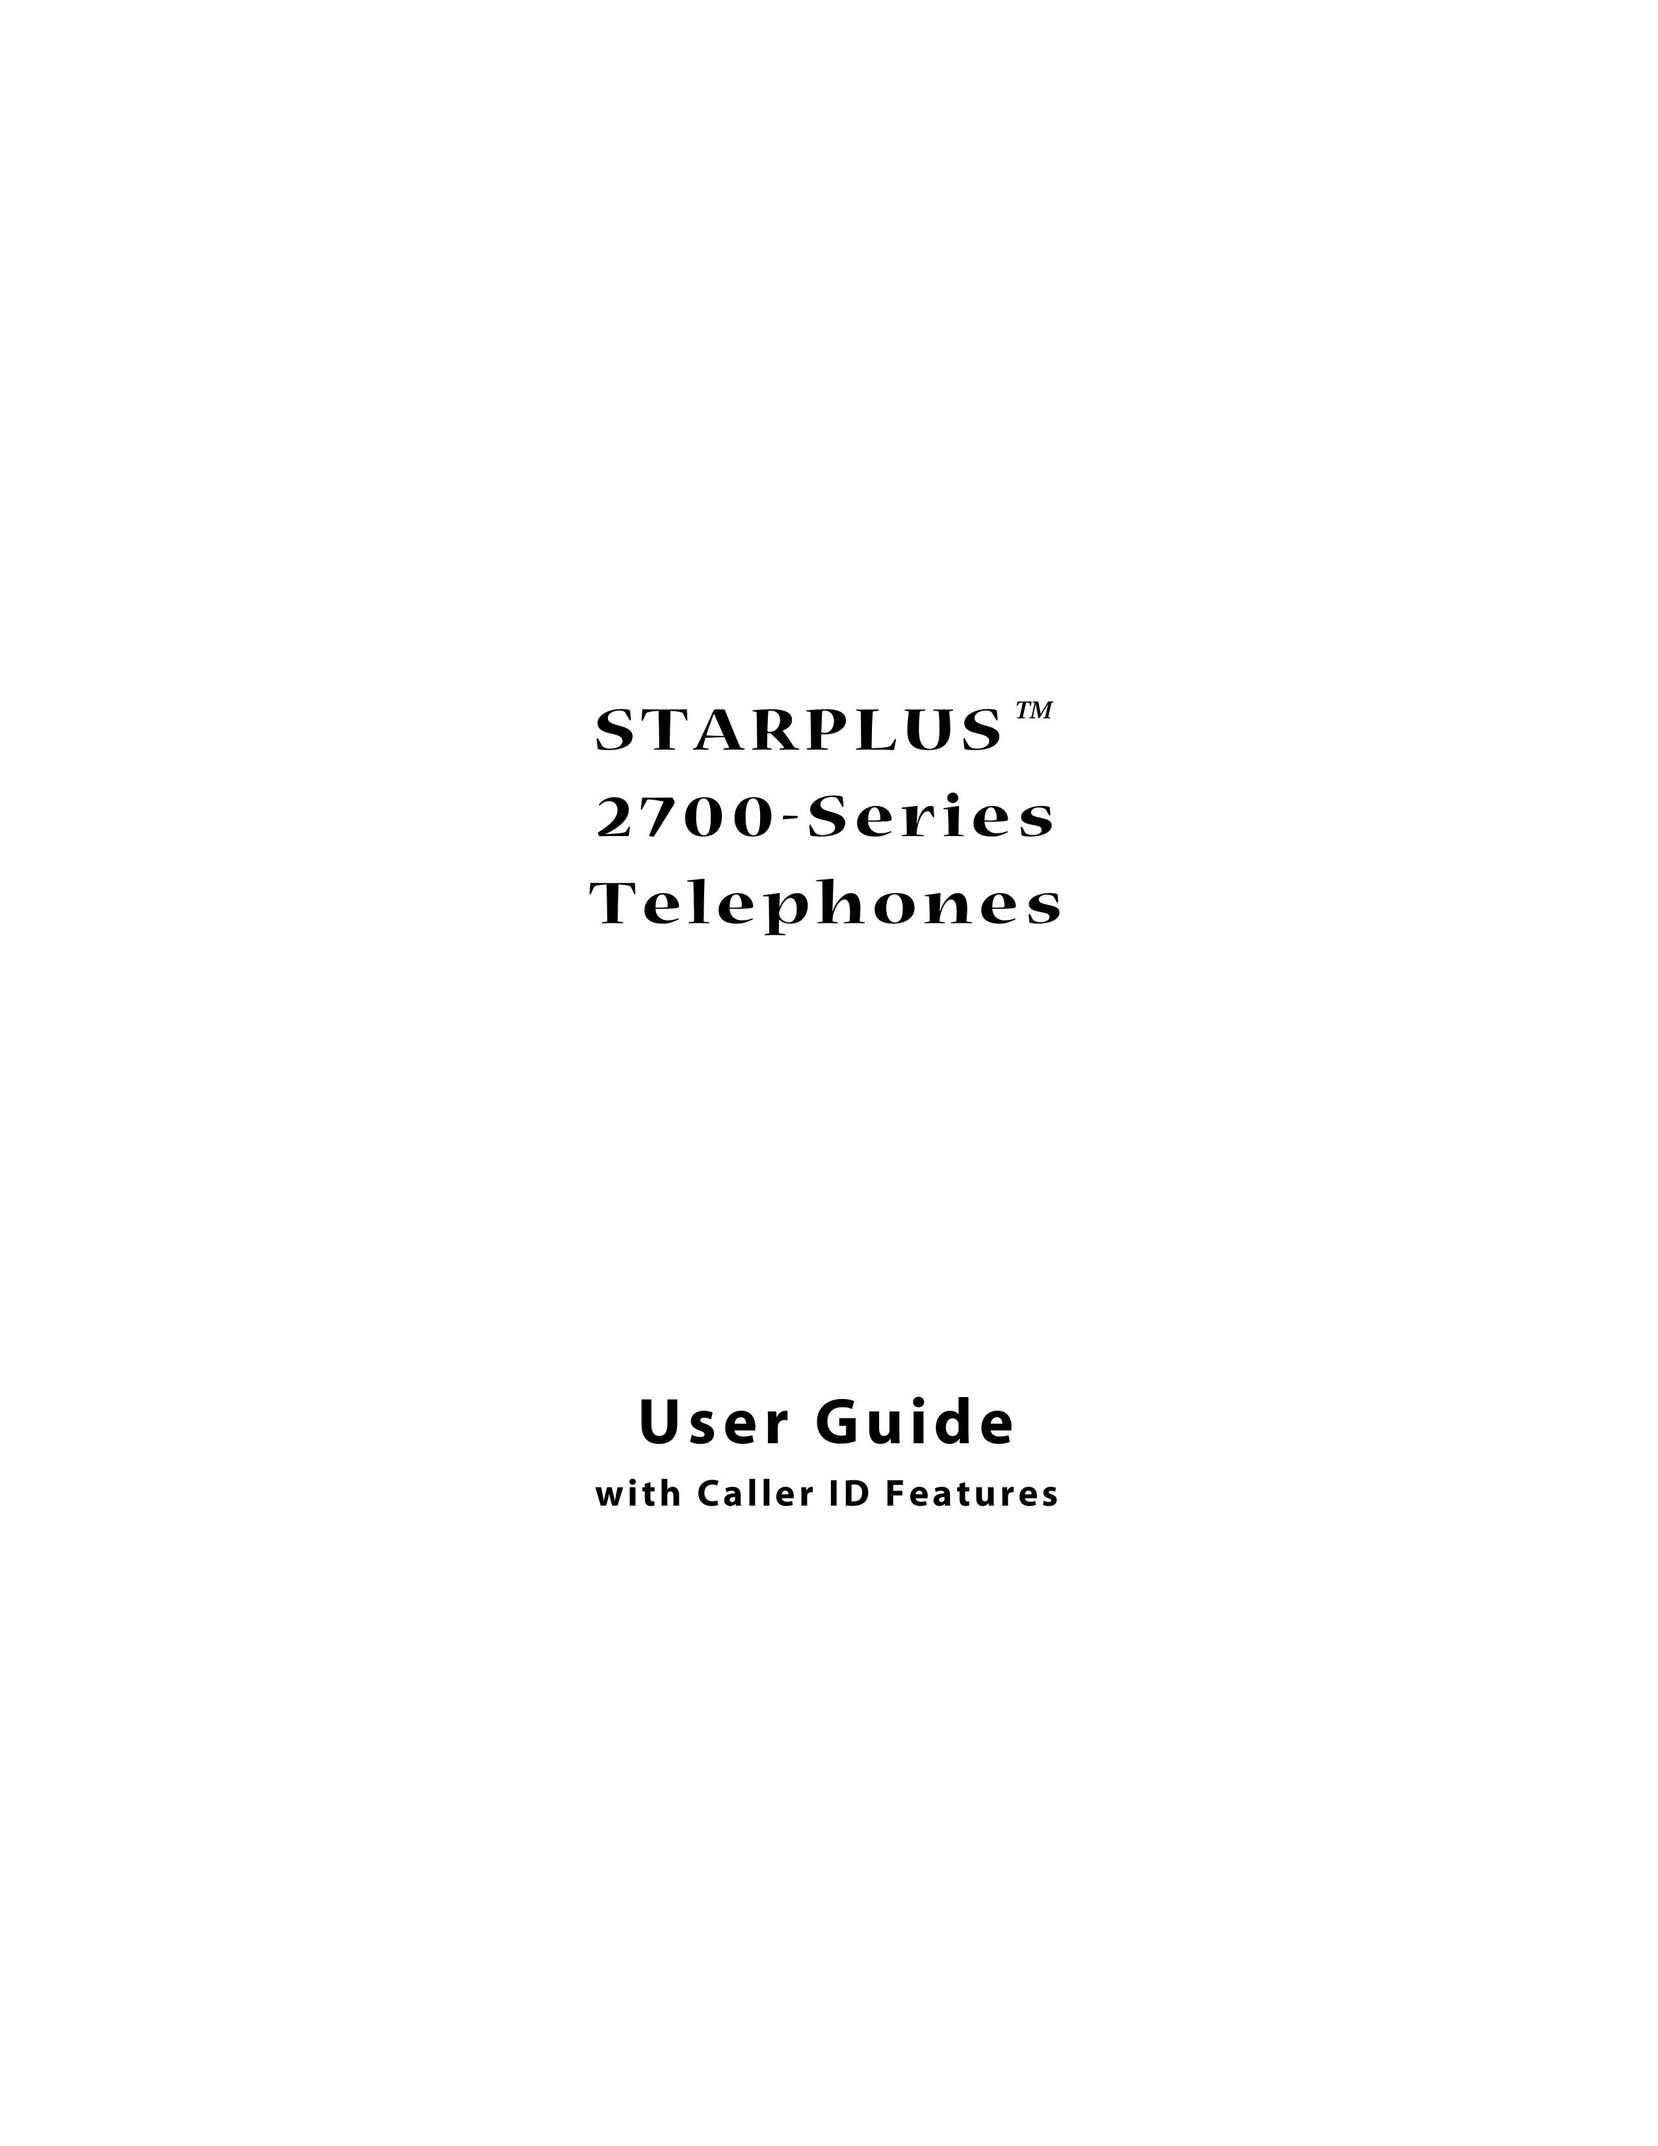 Cabletron Systems 2700 Series Telephone User Manual